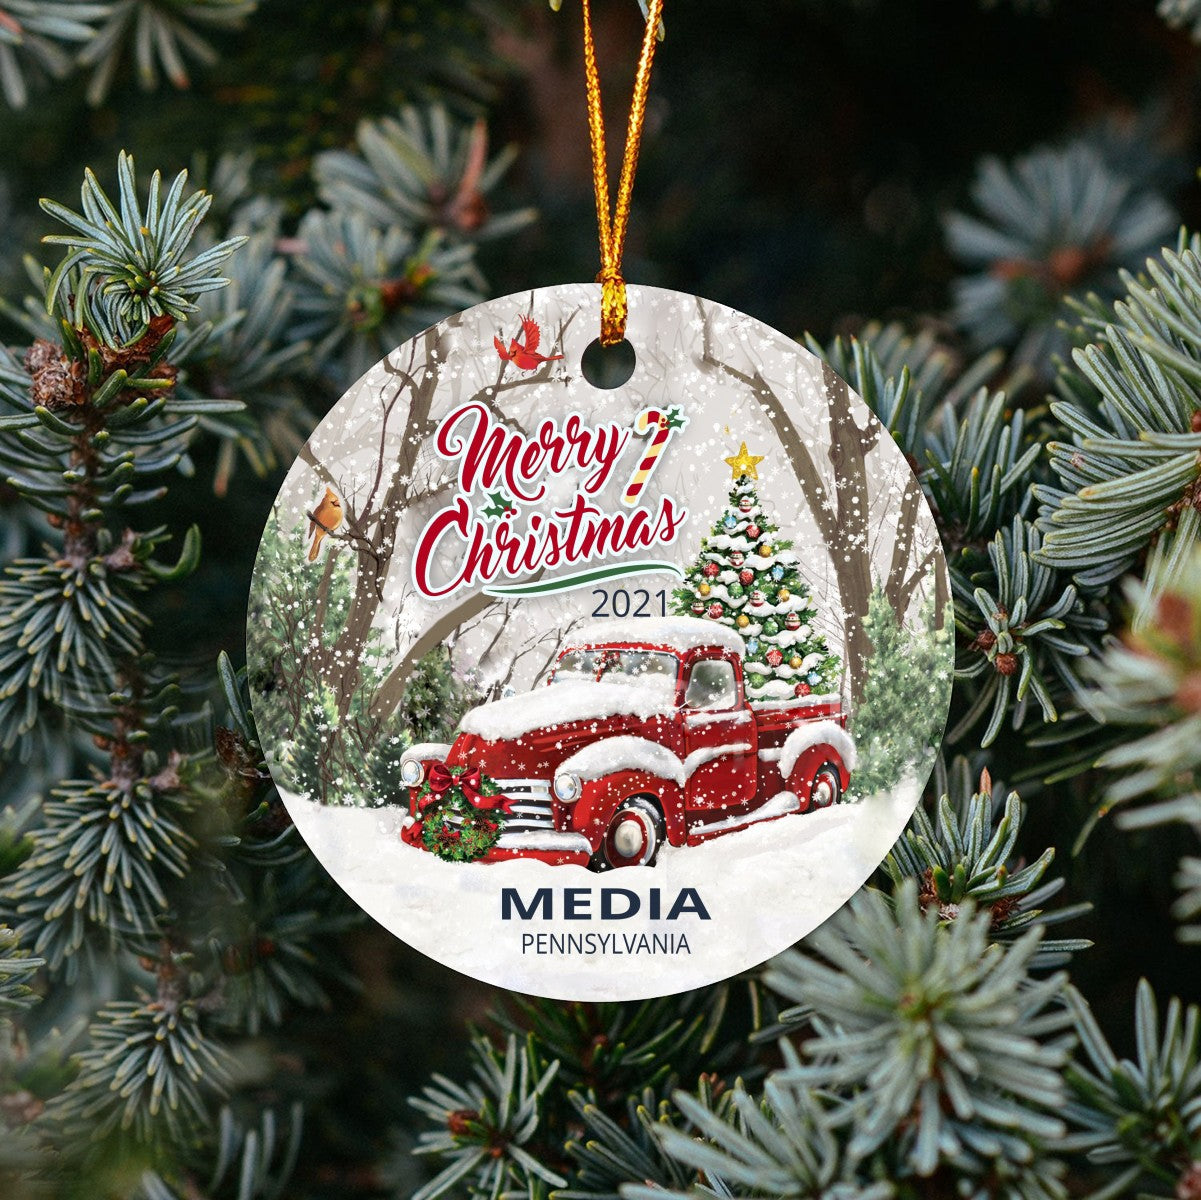 Christmas Tree Ornaments Media - Ornament With Name City, State Media Pennsylvania PA Ornament - Red Truck Xmas Ornaments 3'' Plastic Gift For Family, Friend And Housewarming